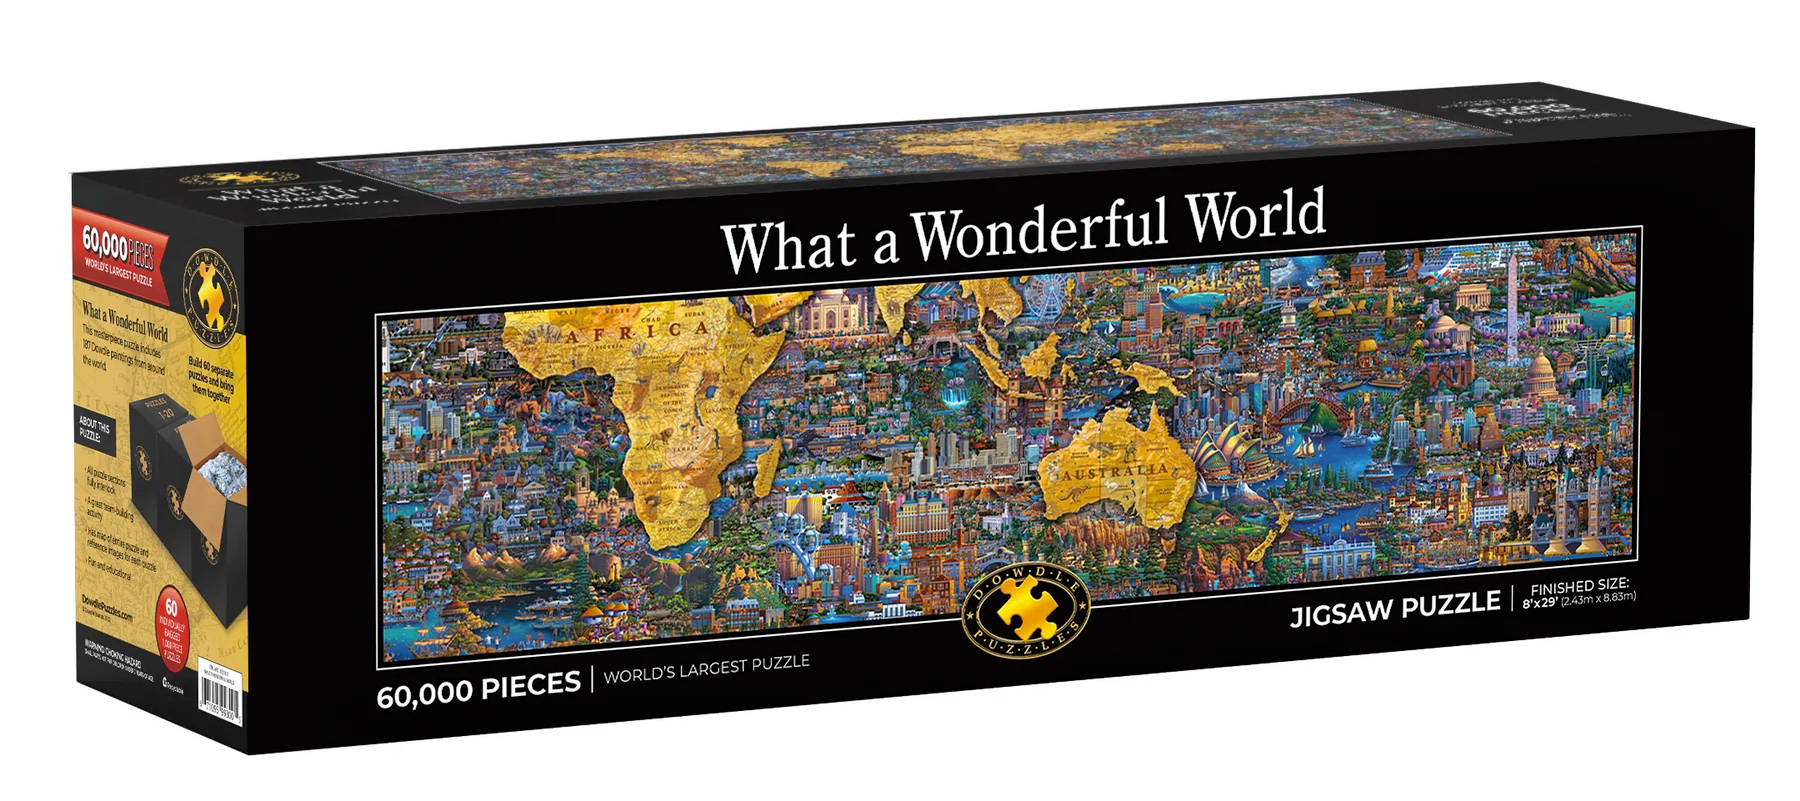 What a Wonderful World - World’s Largest Puzzle with 60,000 Pieces